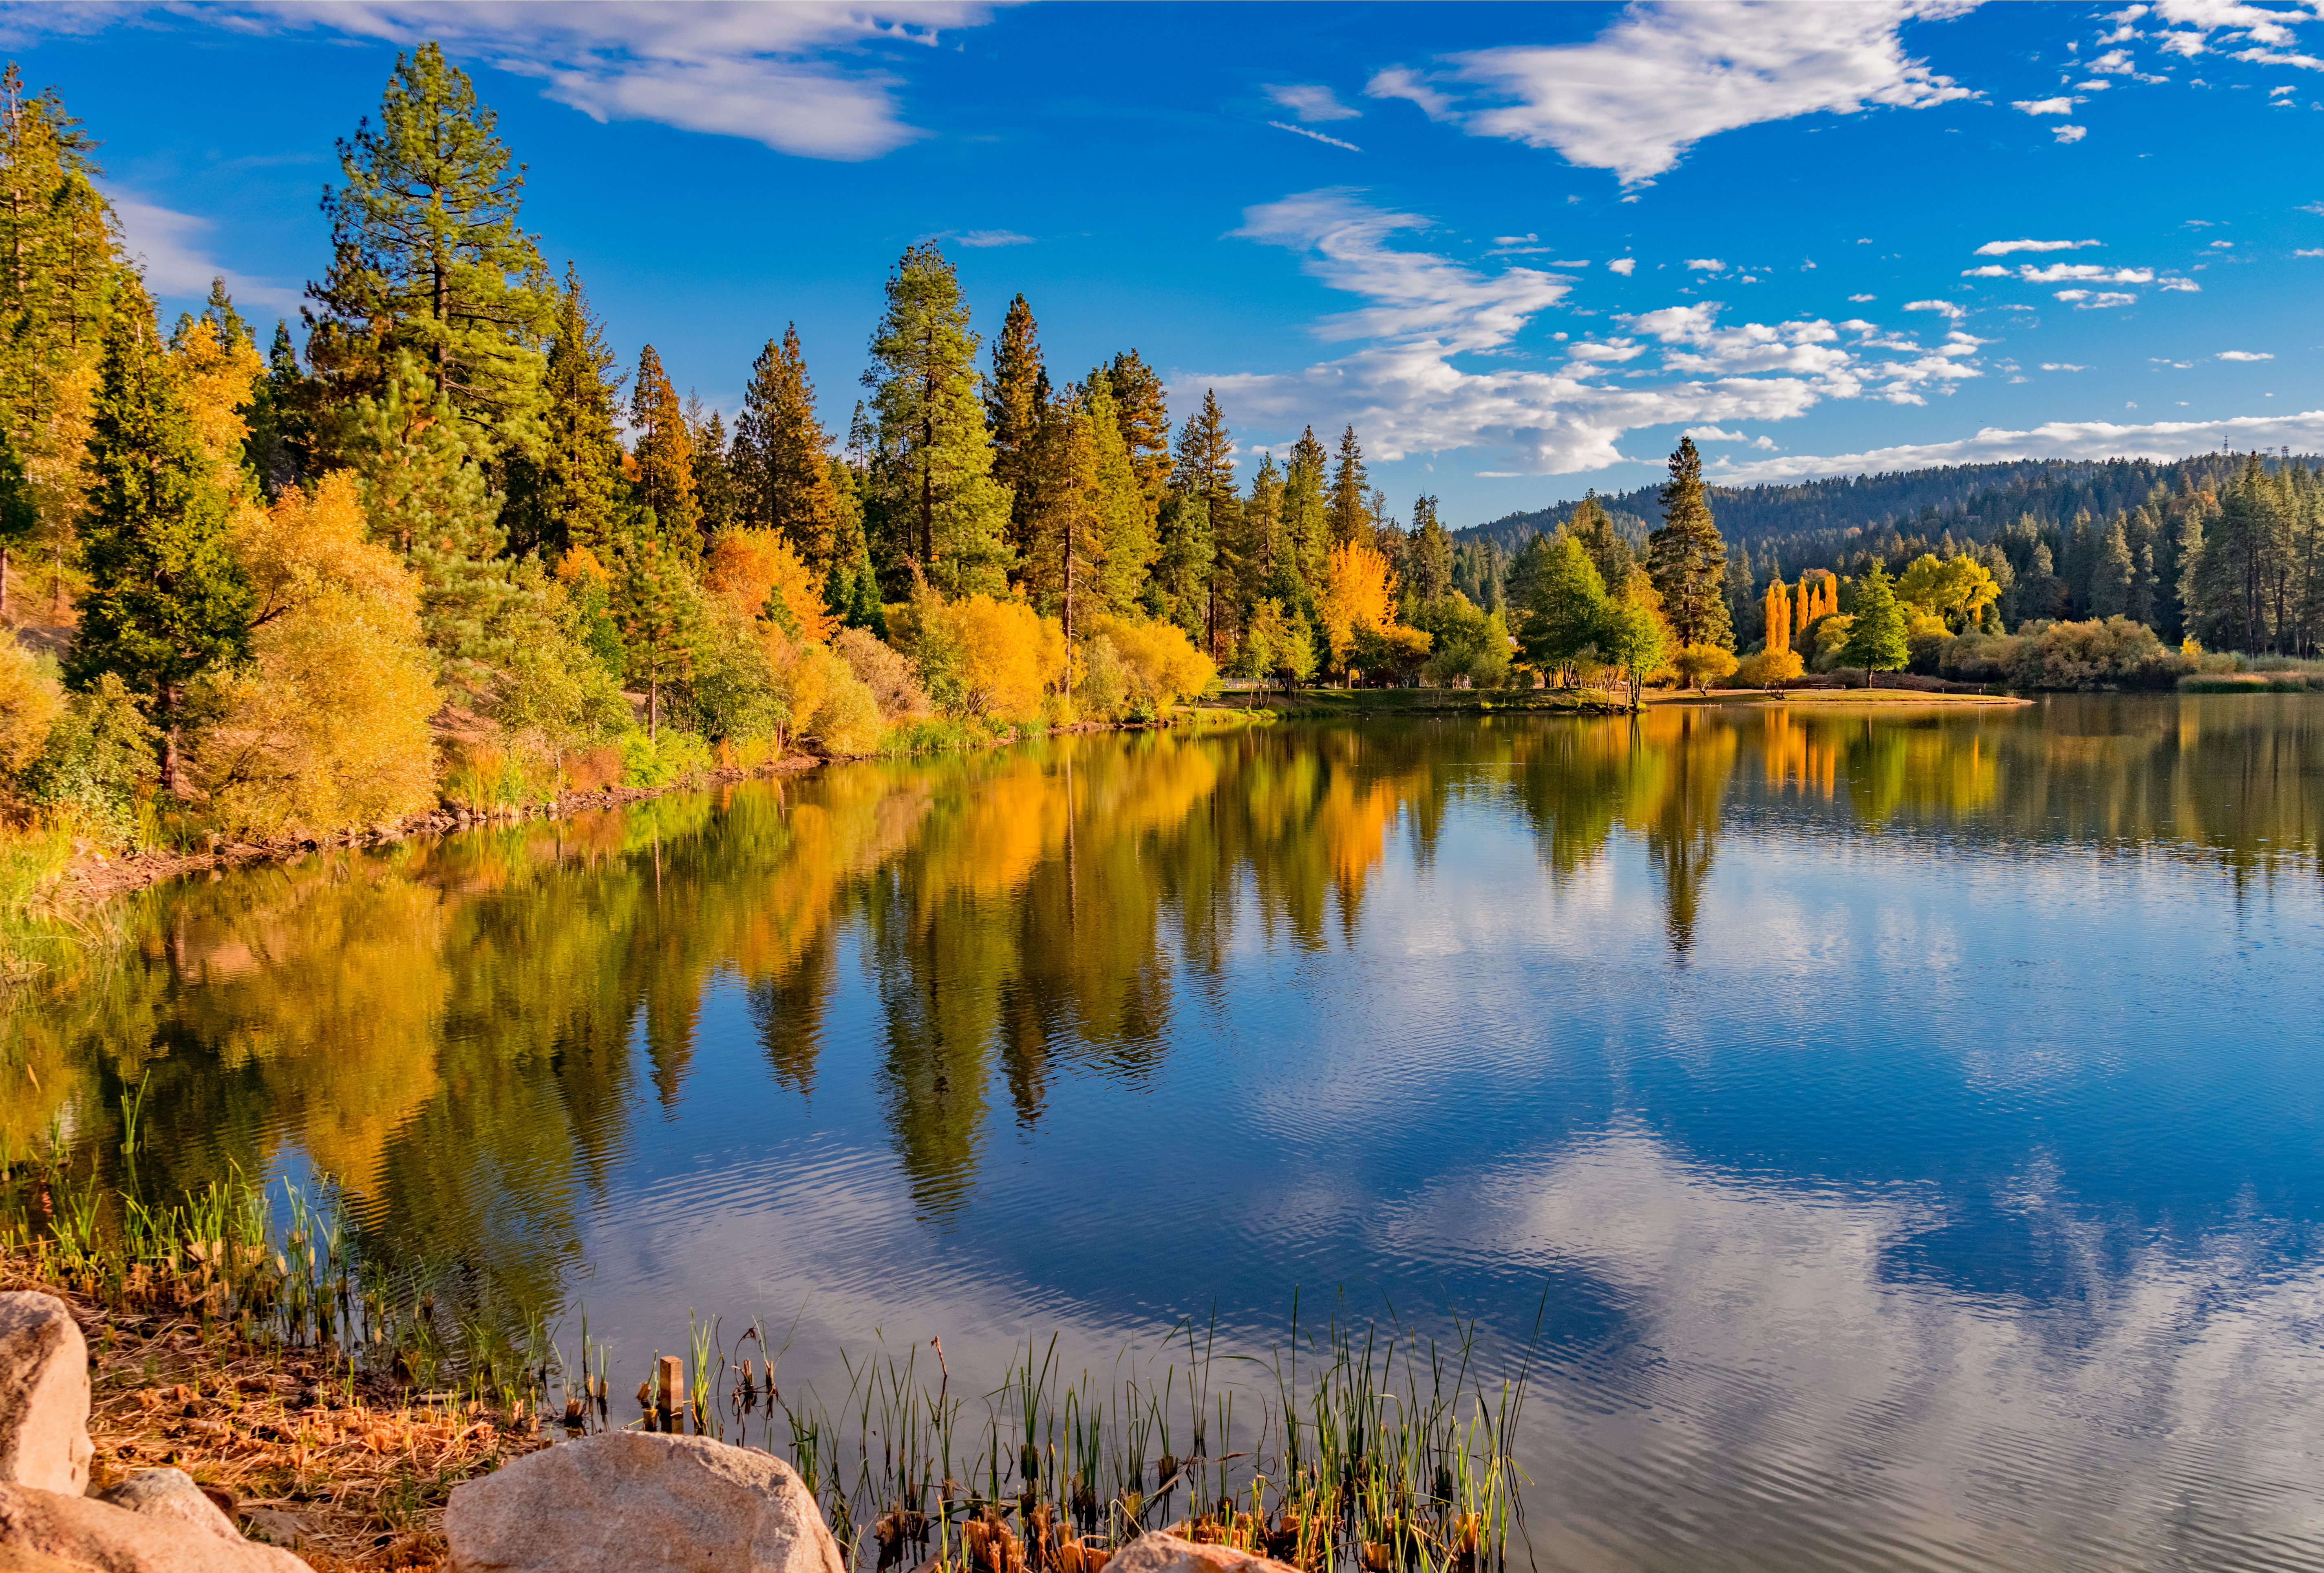 A grove of lakeside trees shows the warm colors of fall in California.